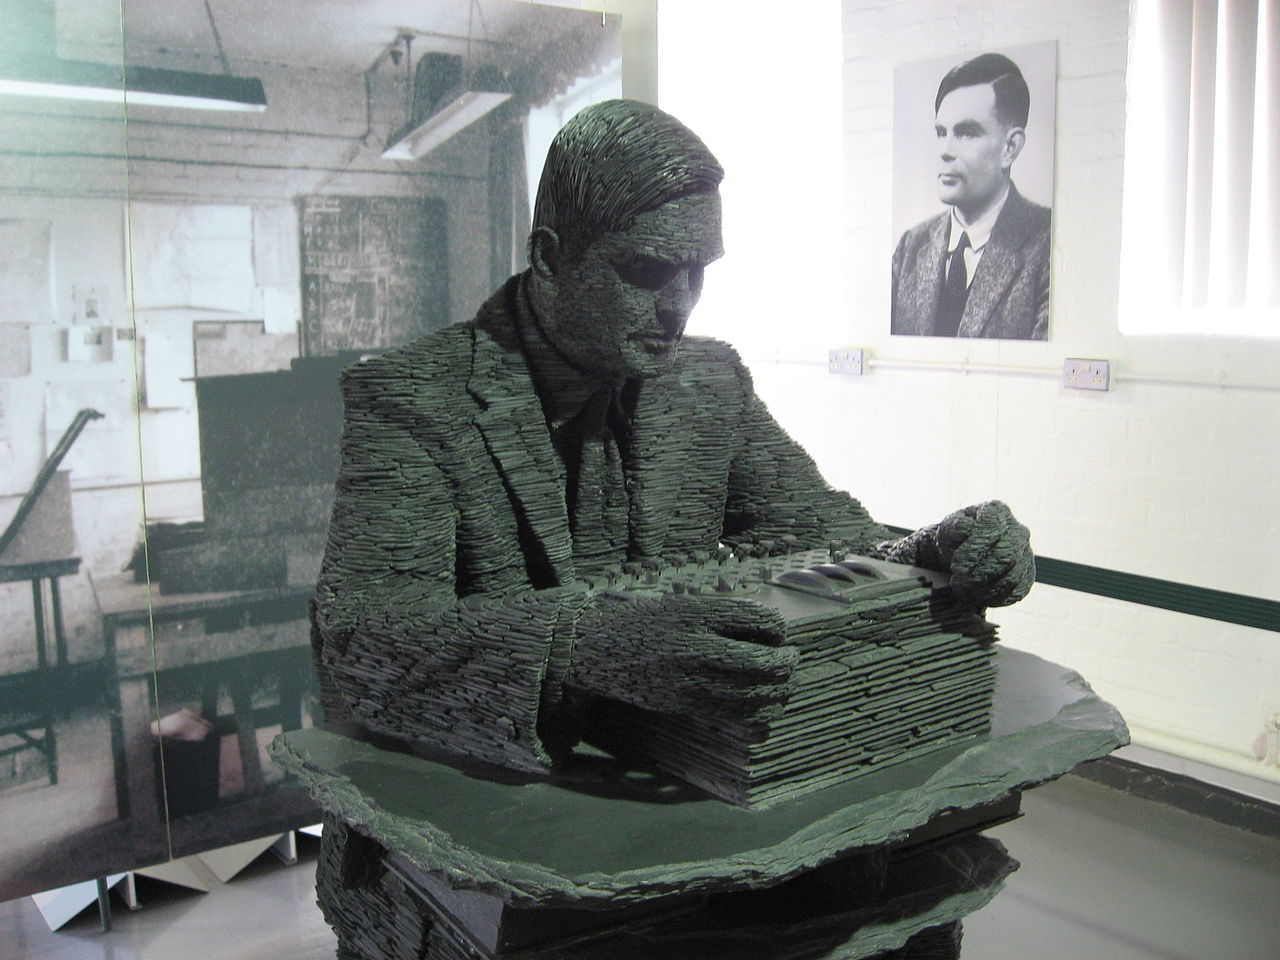 The Father Of Computer Science And AI: Alan Turing